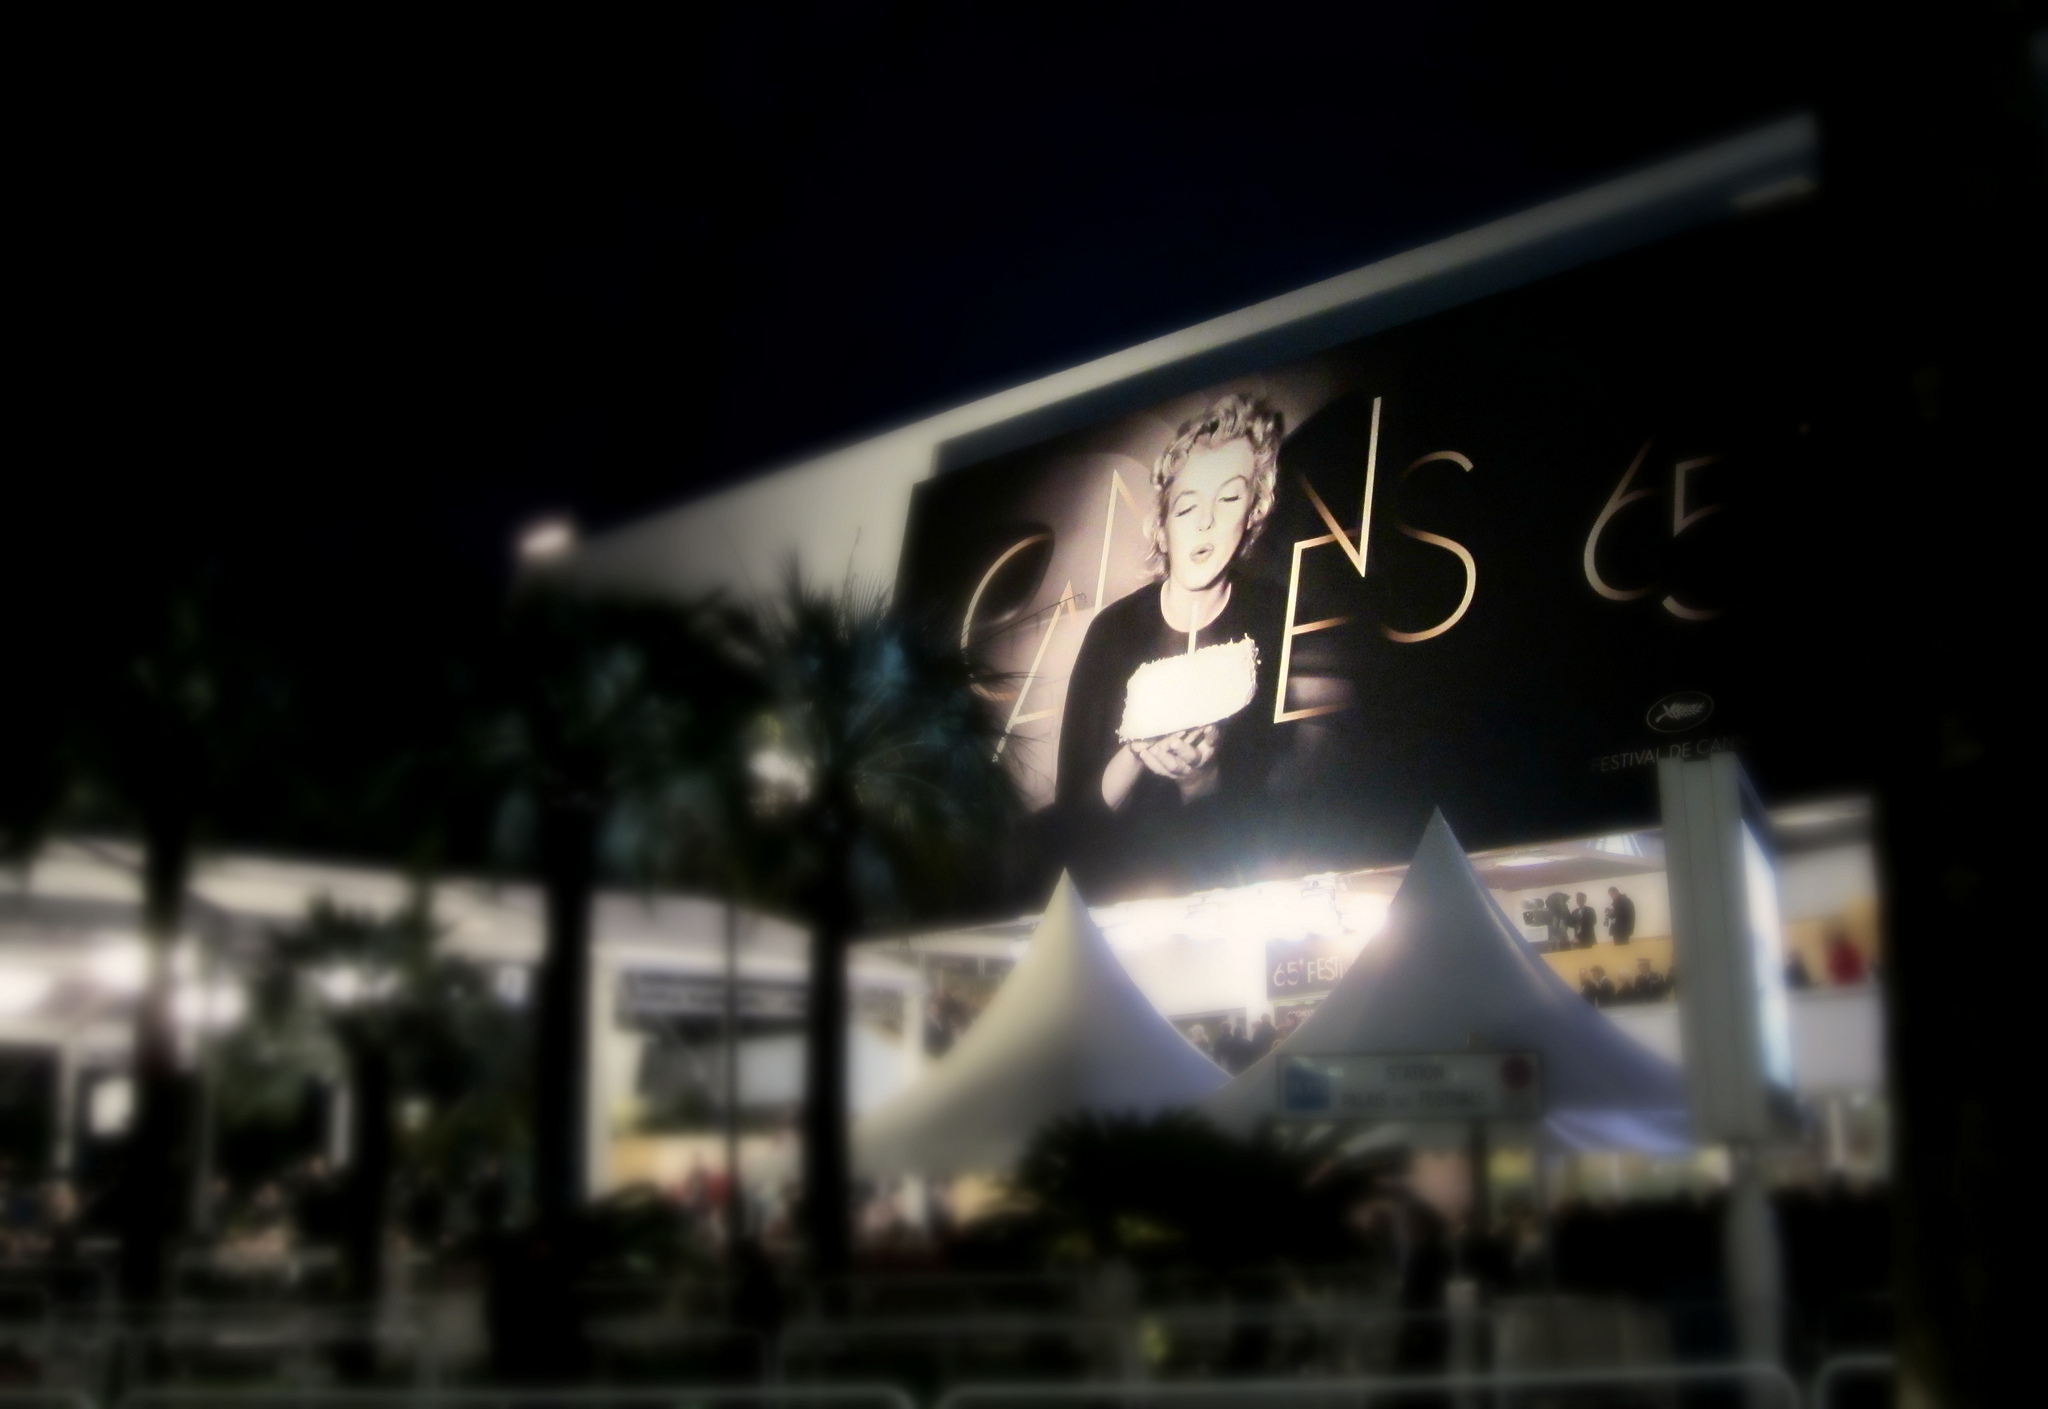 68th Cannes Film Festival: The Good, The Great and The Just Plain Hilarious